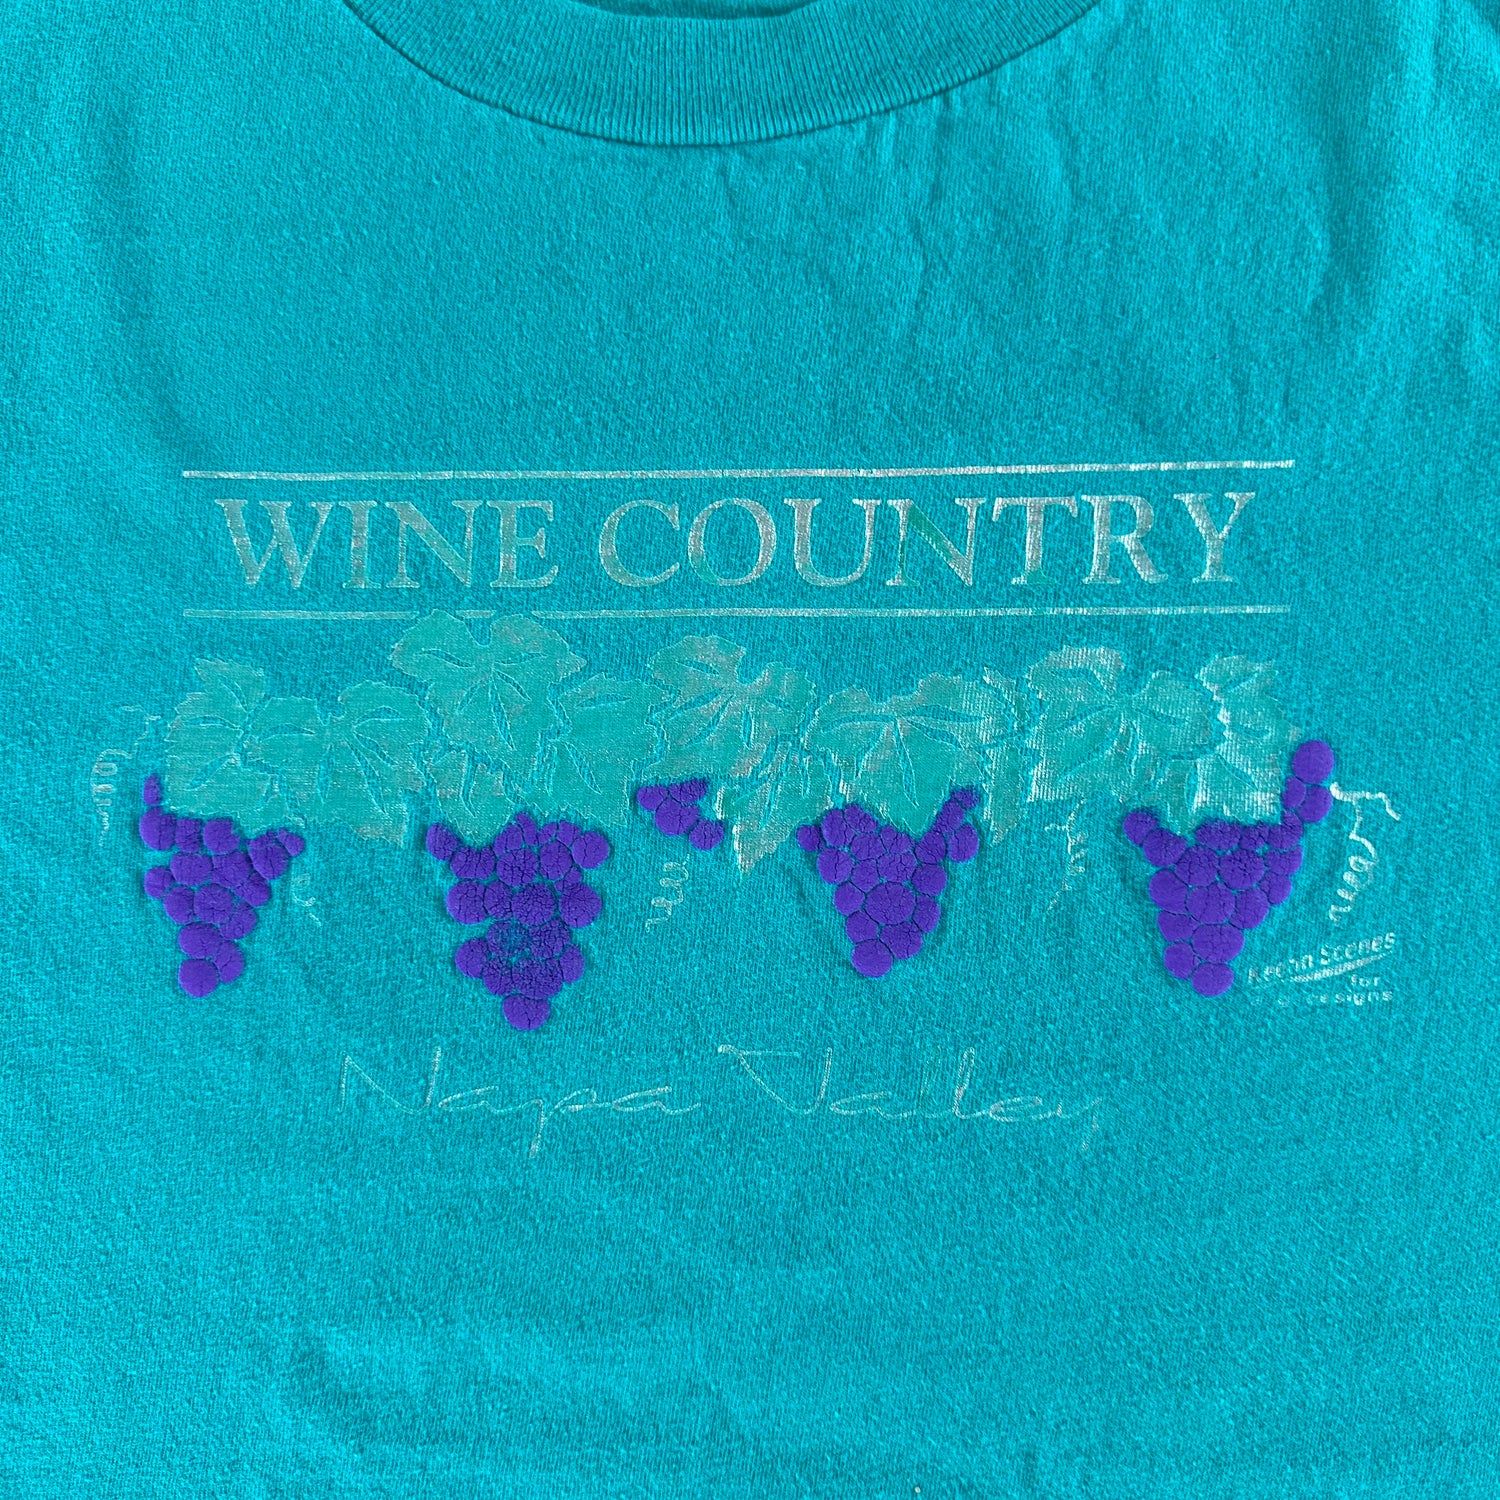 Vintage 1990s Napa Valley T-shirt size Large